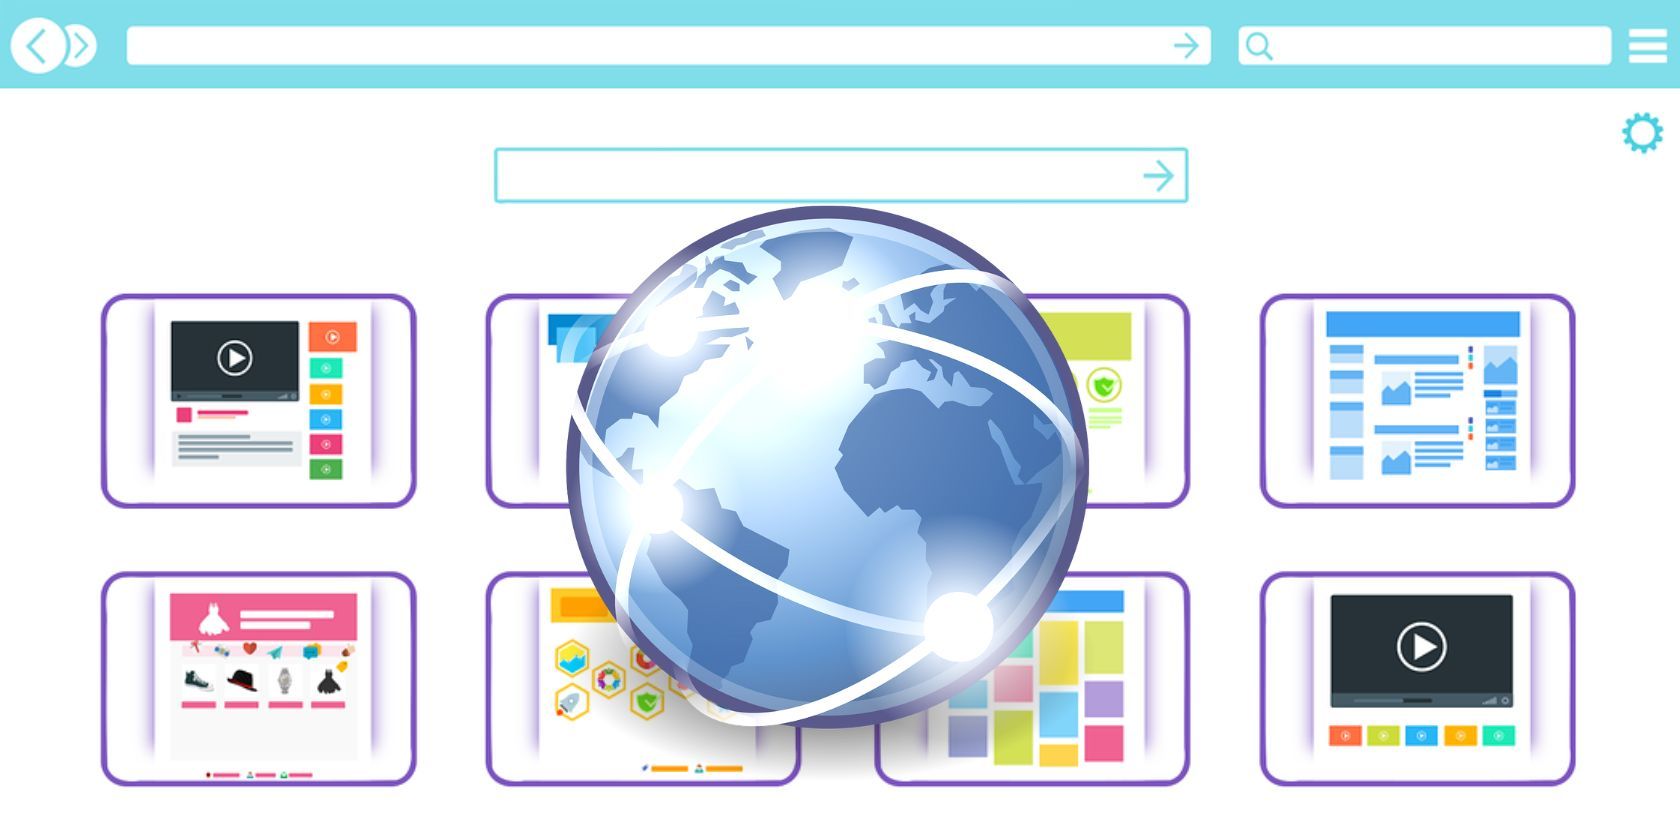 Globe symbolizing the internet seen over a graphic illustration of a browser